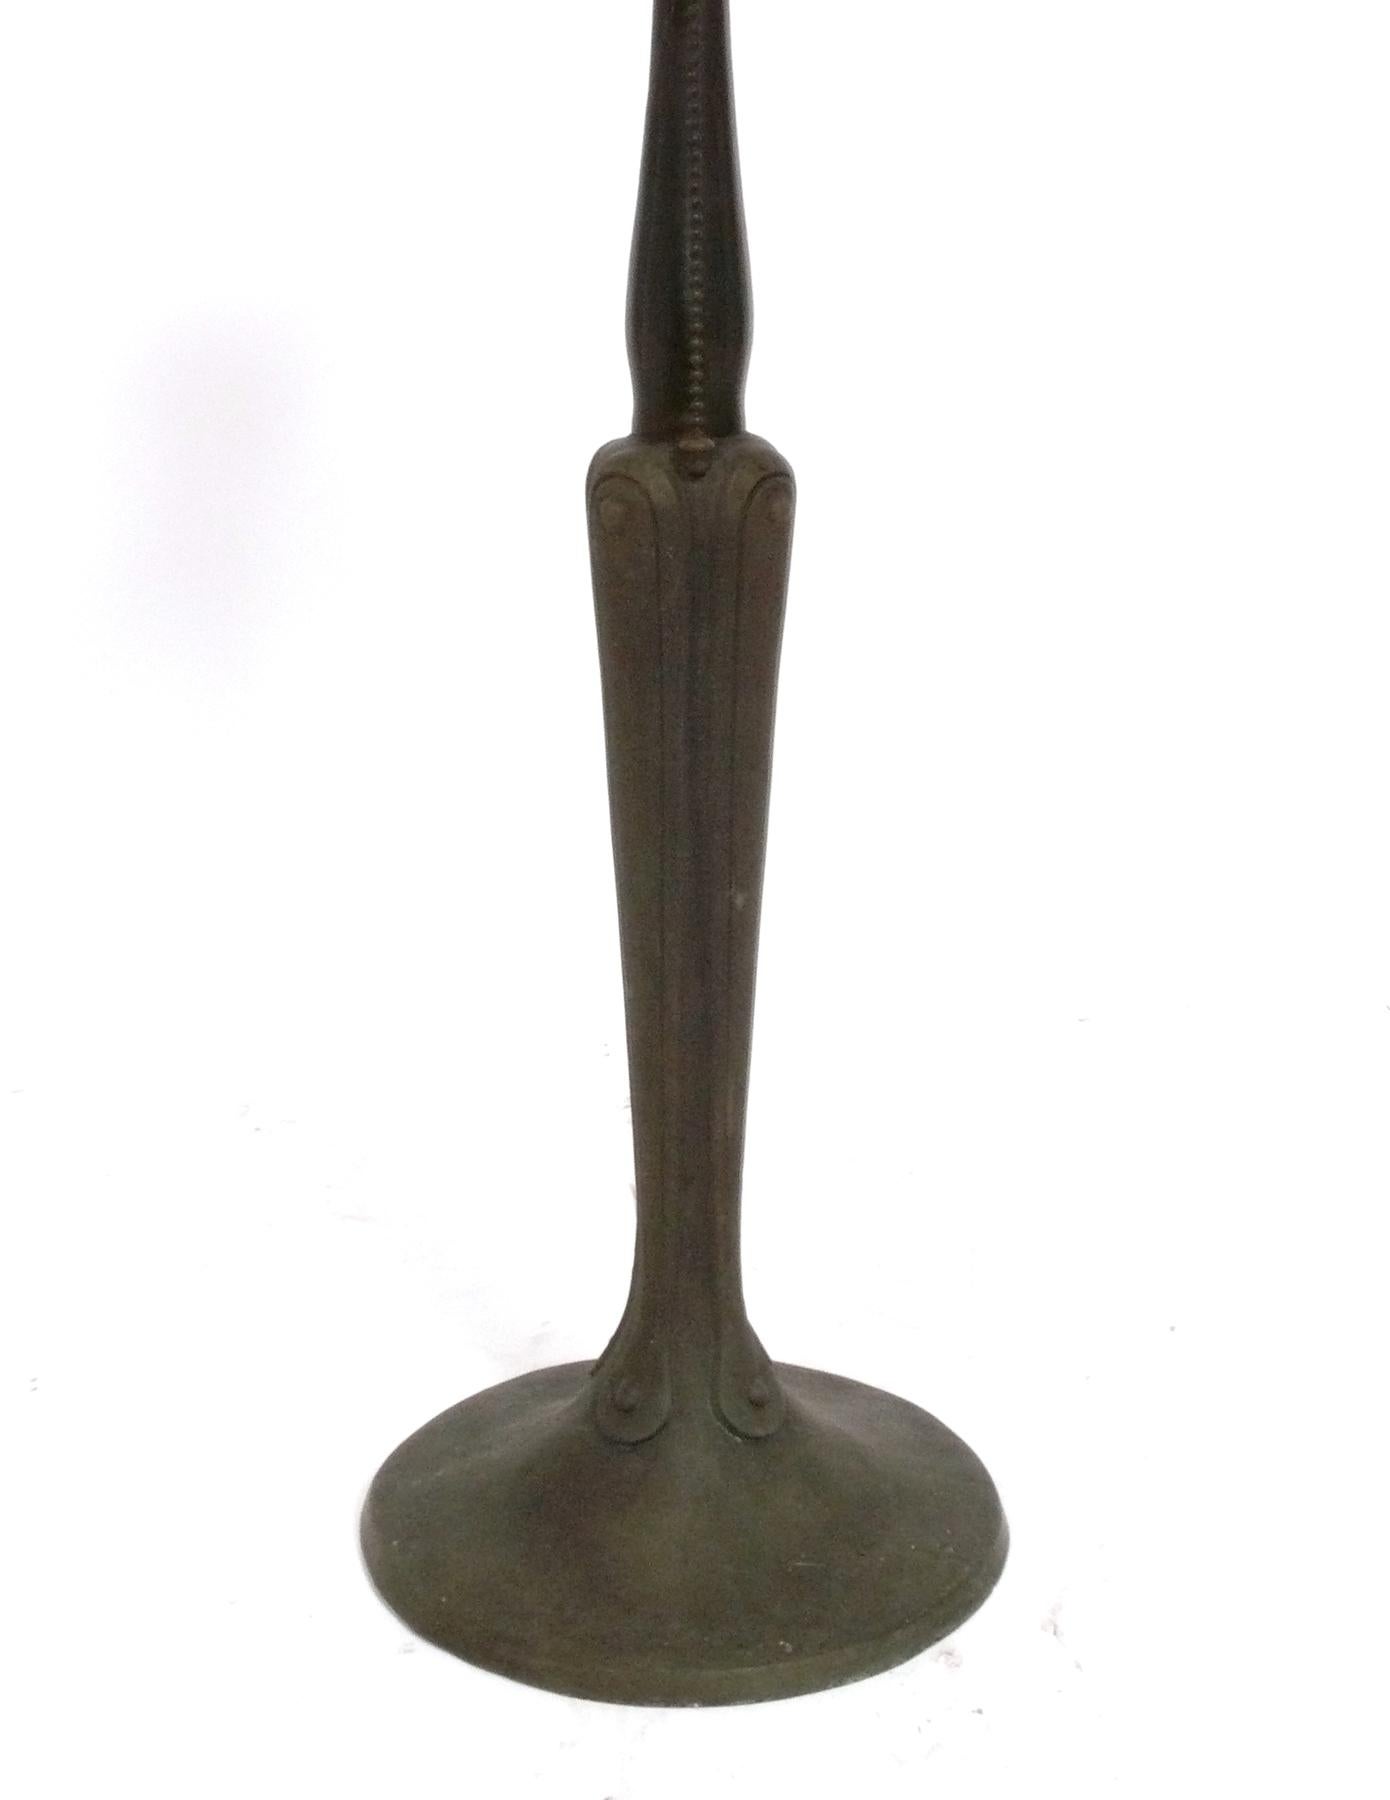 Arts & Crafts era bronze lamp with mica shade, made by the Handel Company, unsigned, American, circa 1910s. This lamp looks wonderful when it is lit, as the mica shade gives off a warm glow. It has been rewired with a brown cloth cord and is ready